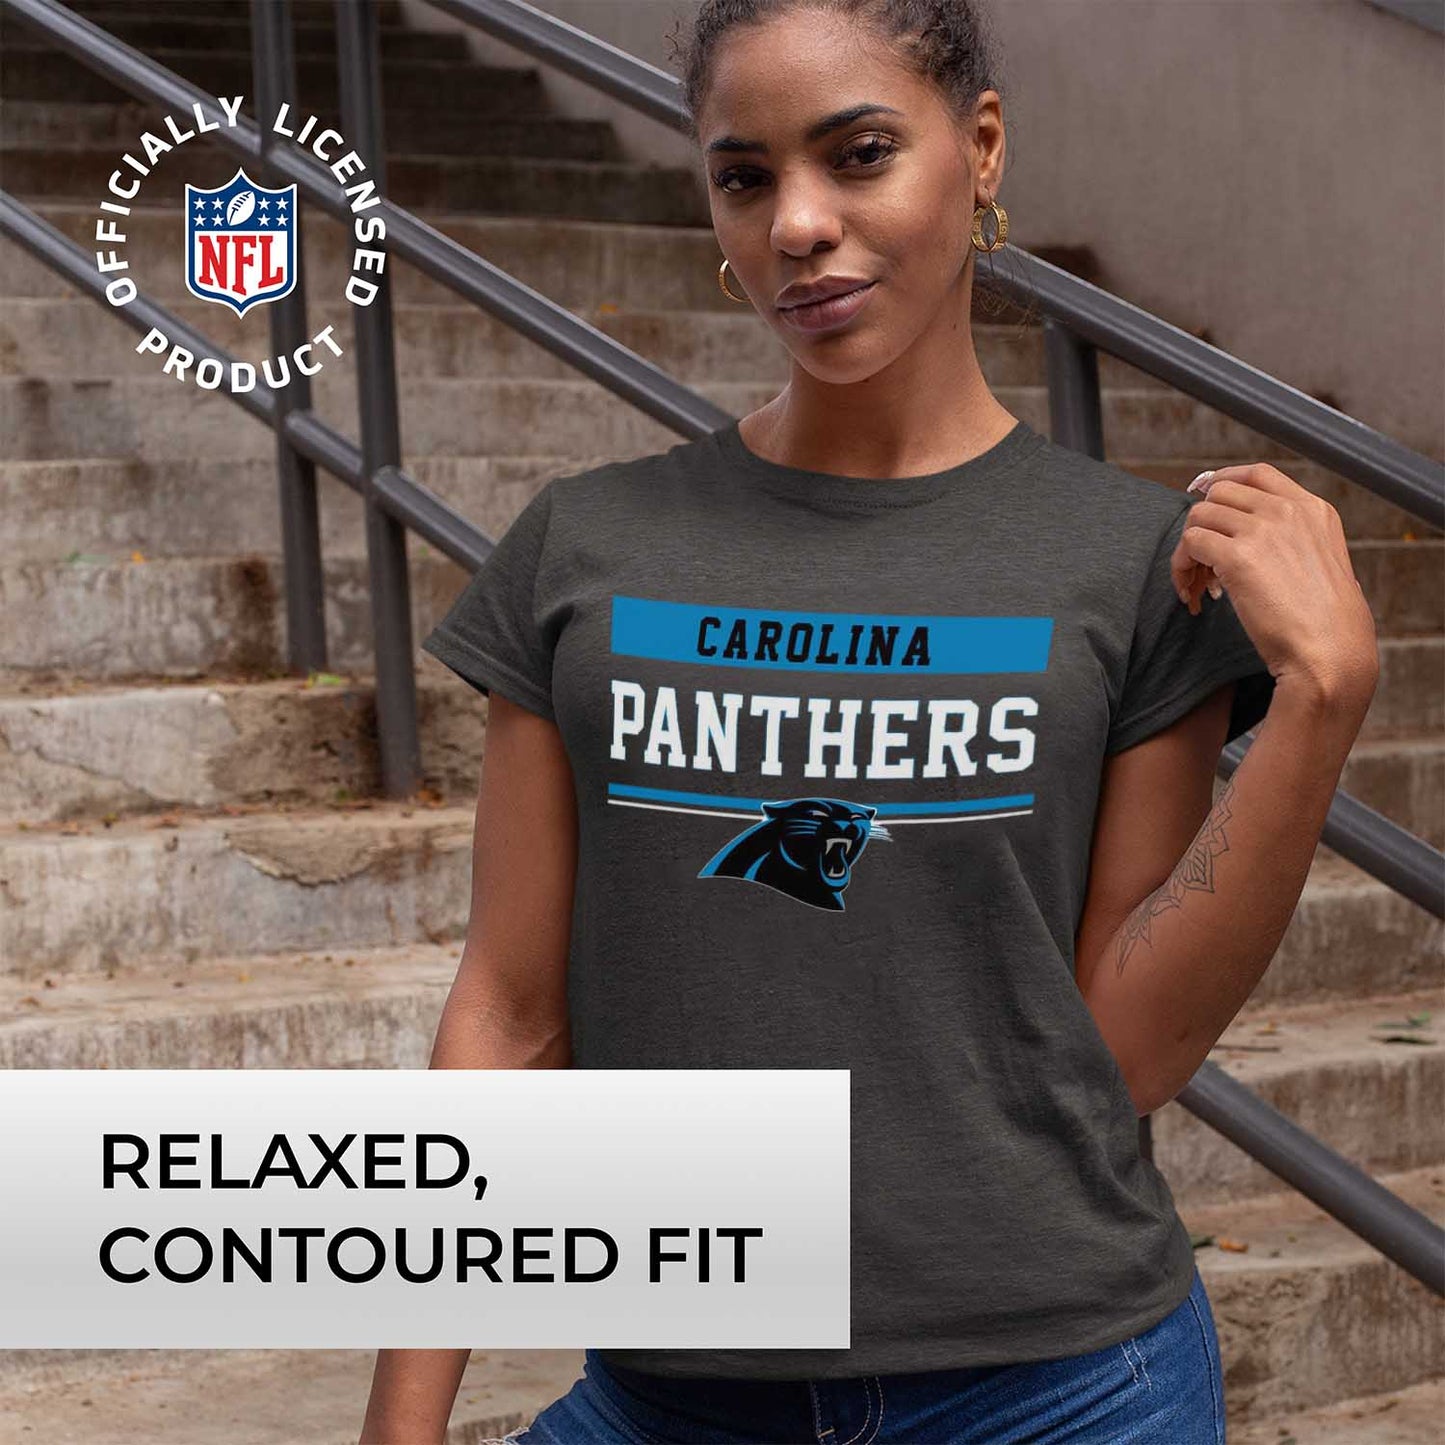 Carolina Panthers NFL Women's Team Block Plus Sized Relaxed Fit T-Shirt - Charcoal